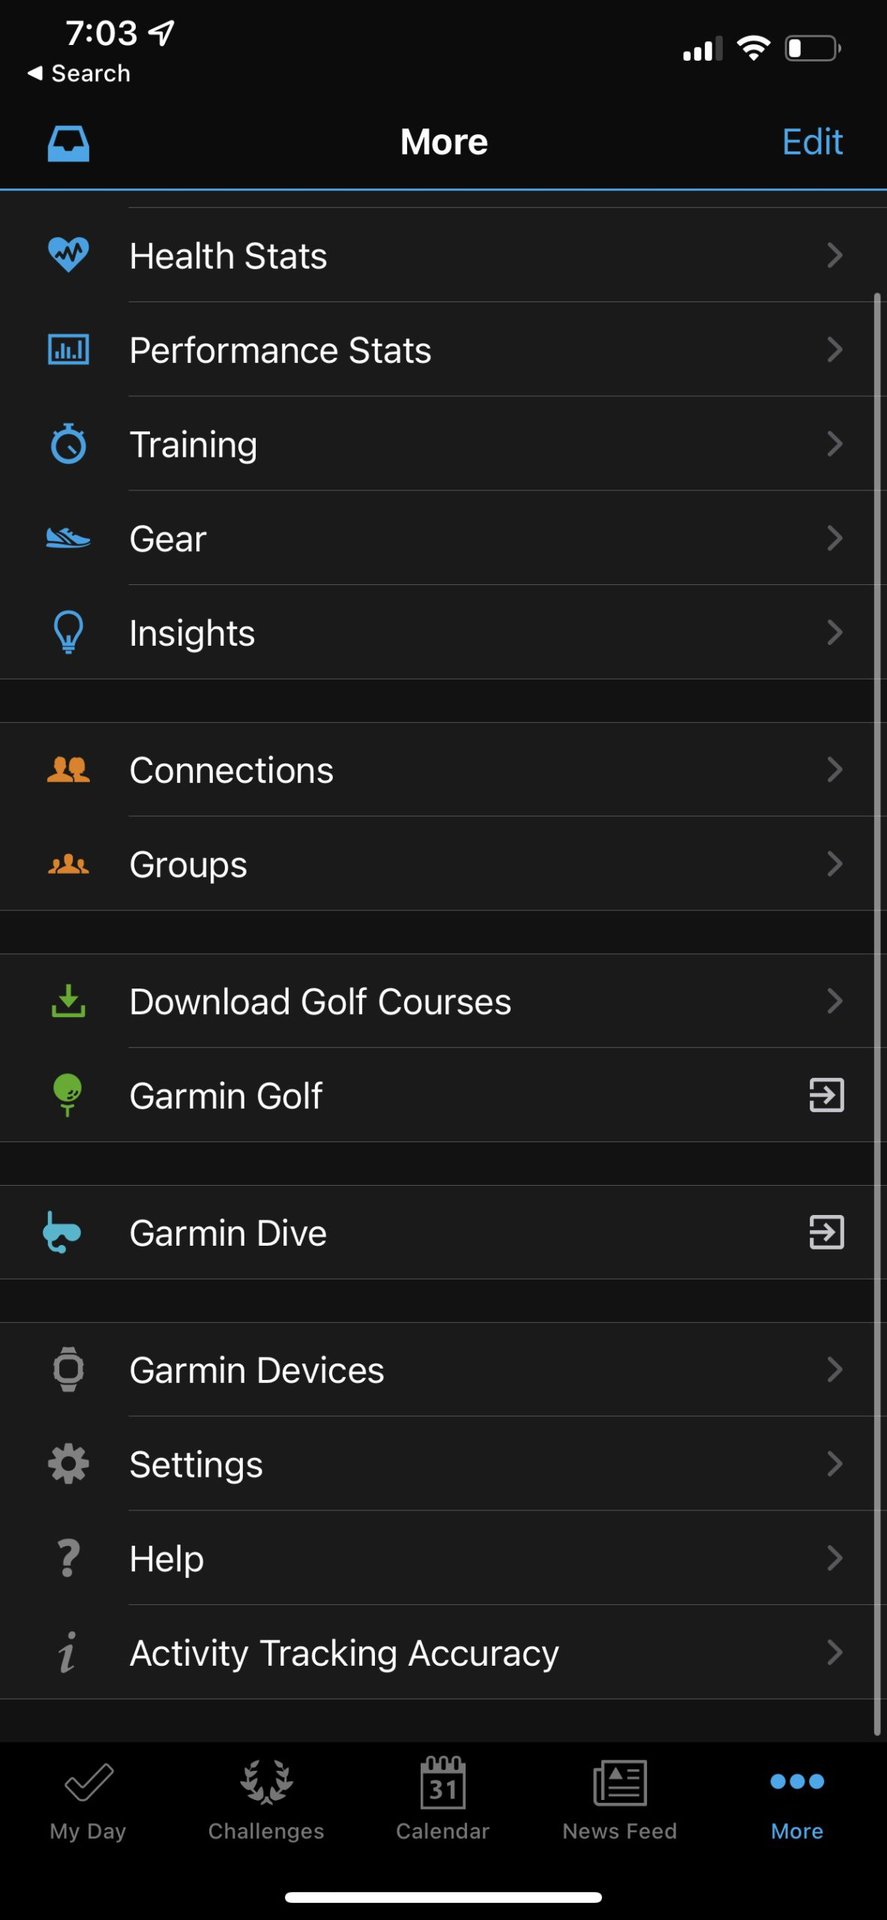 How to pair and sync your Garmin watch with your